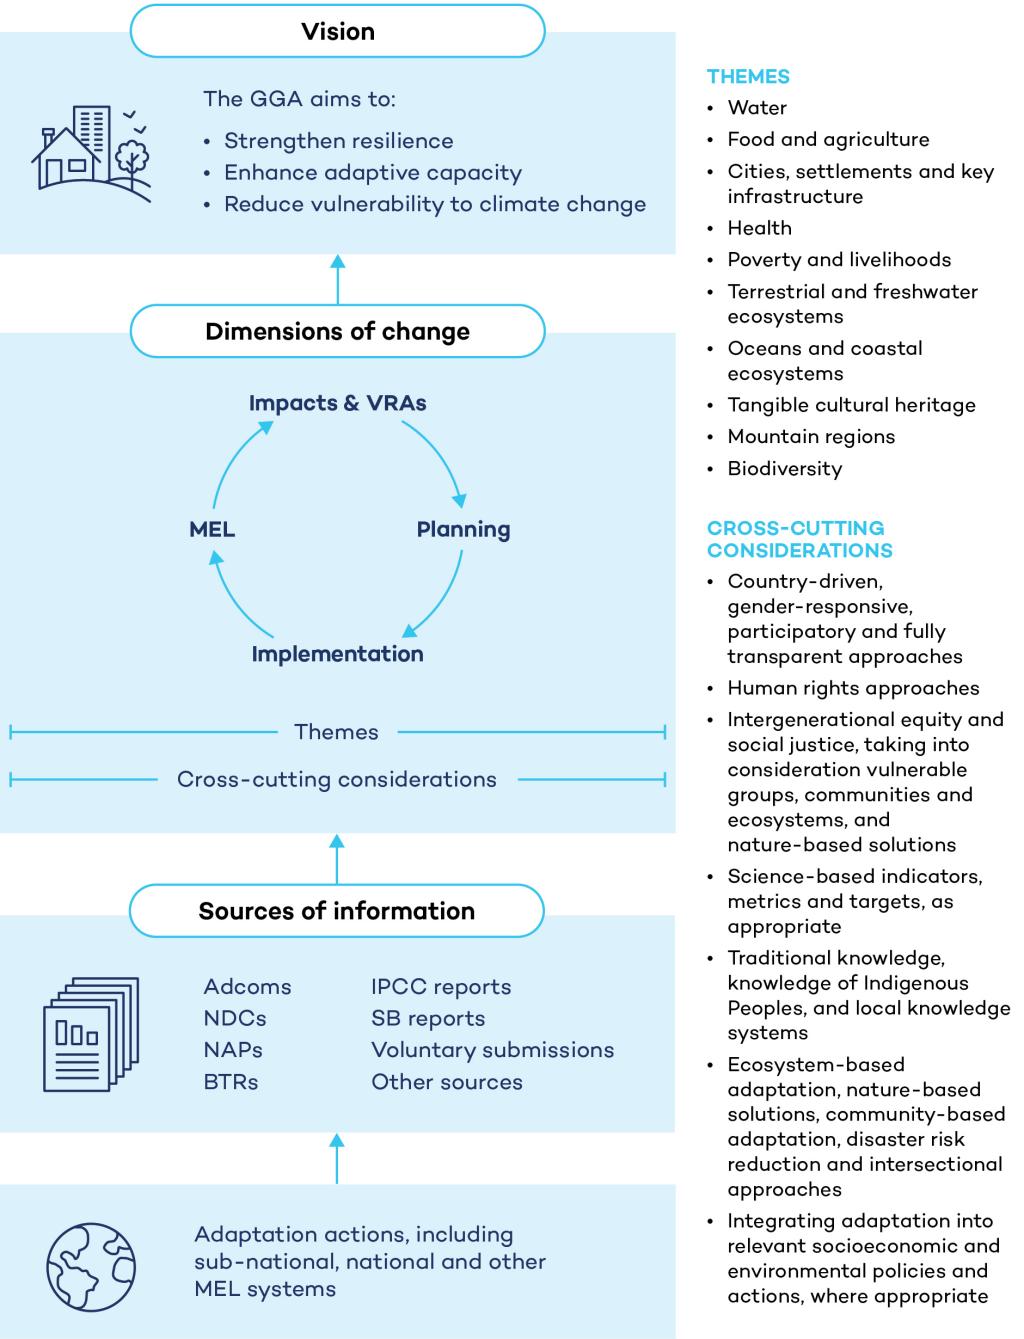 A figure outlining monitoring, evaluation, and learning in the context of the Global Goal on Adaptation